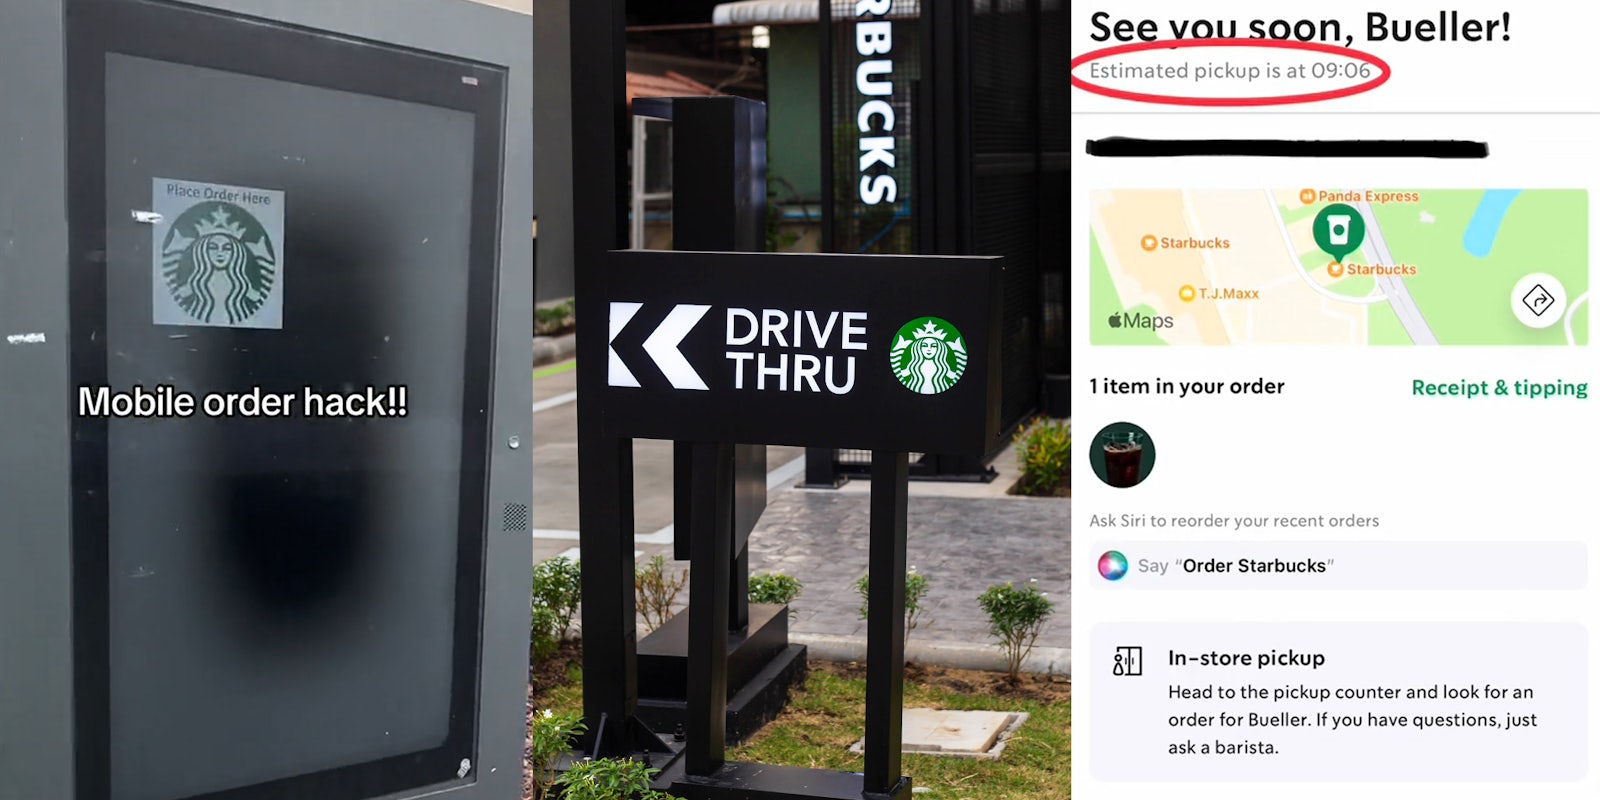 Starbucks drive thru order screen with caption 'Mobile order hack!!' (l) Starbucks drive thru with signs (c) Starbucks mobile order with time circled with red (r)